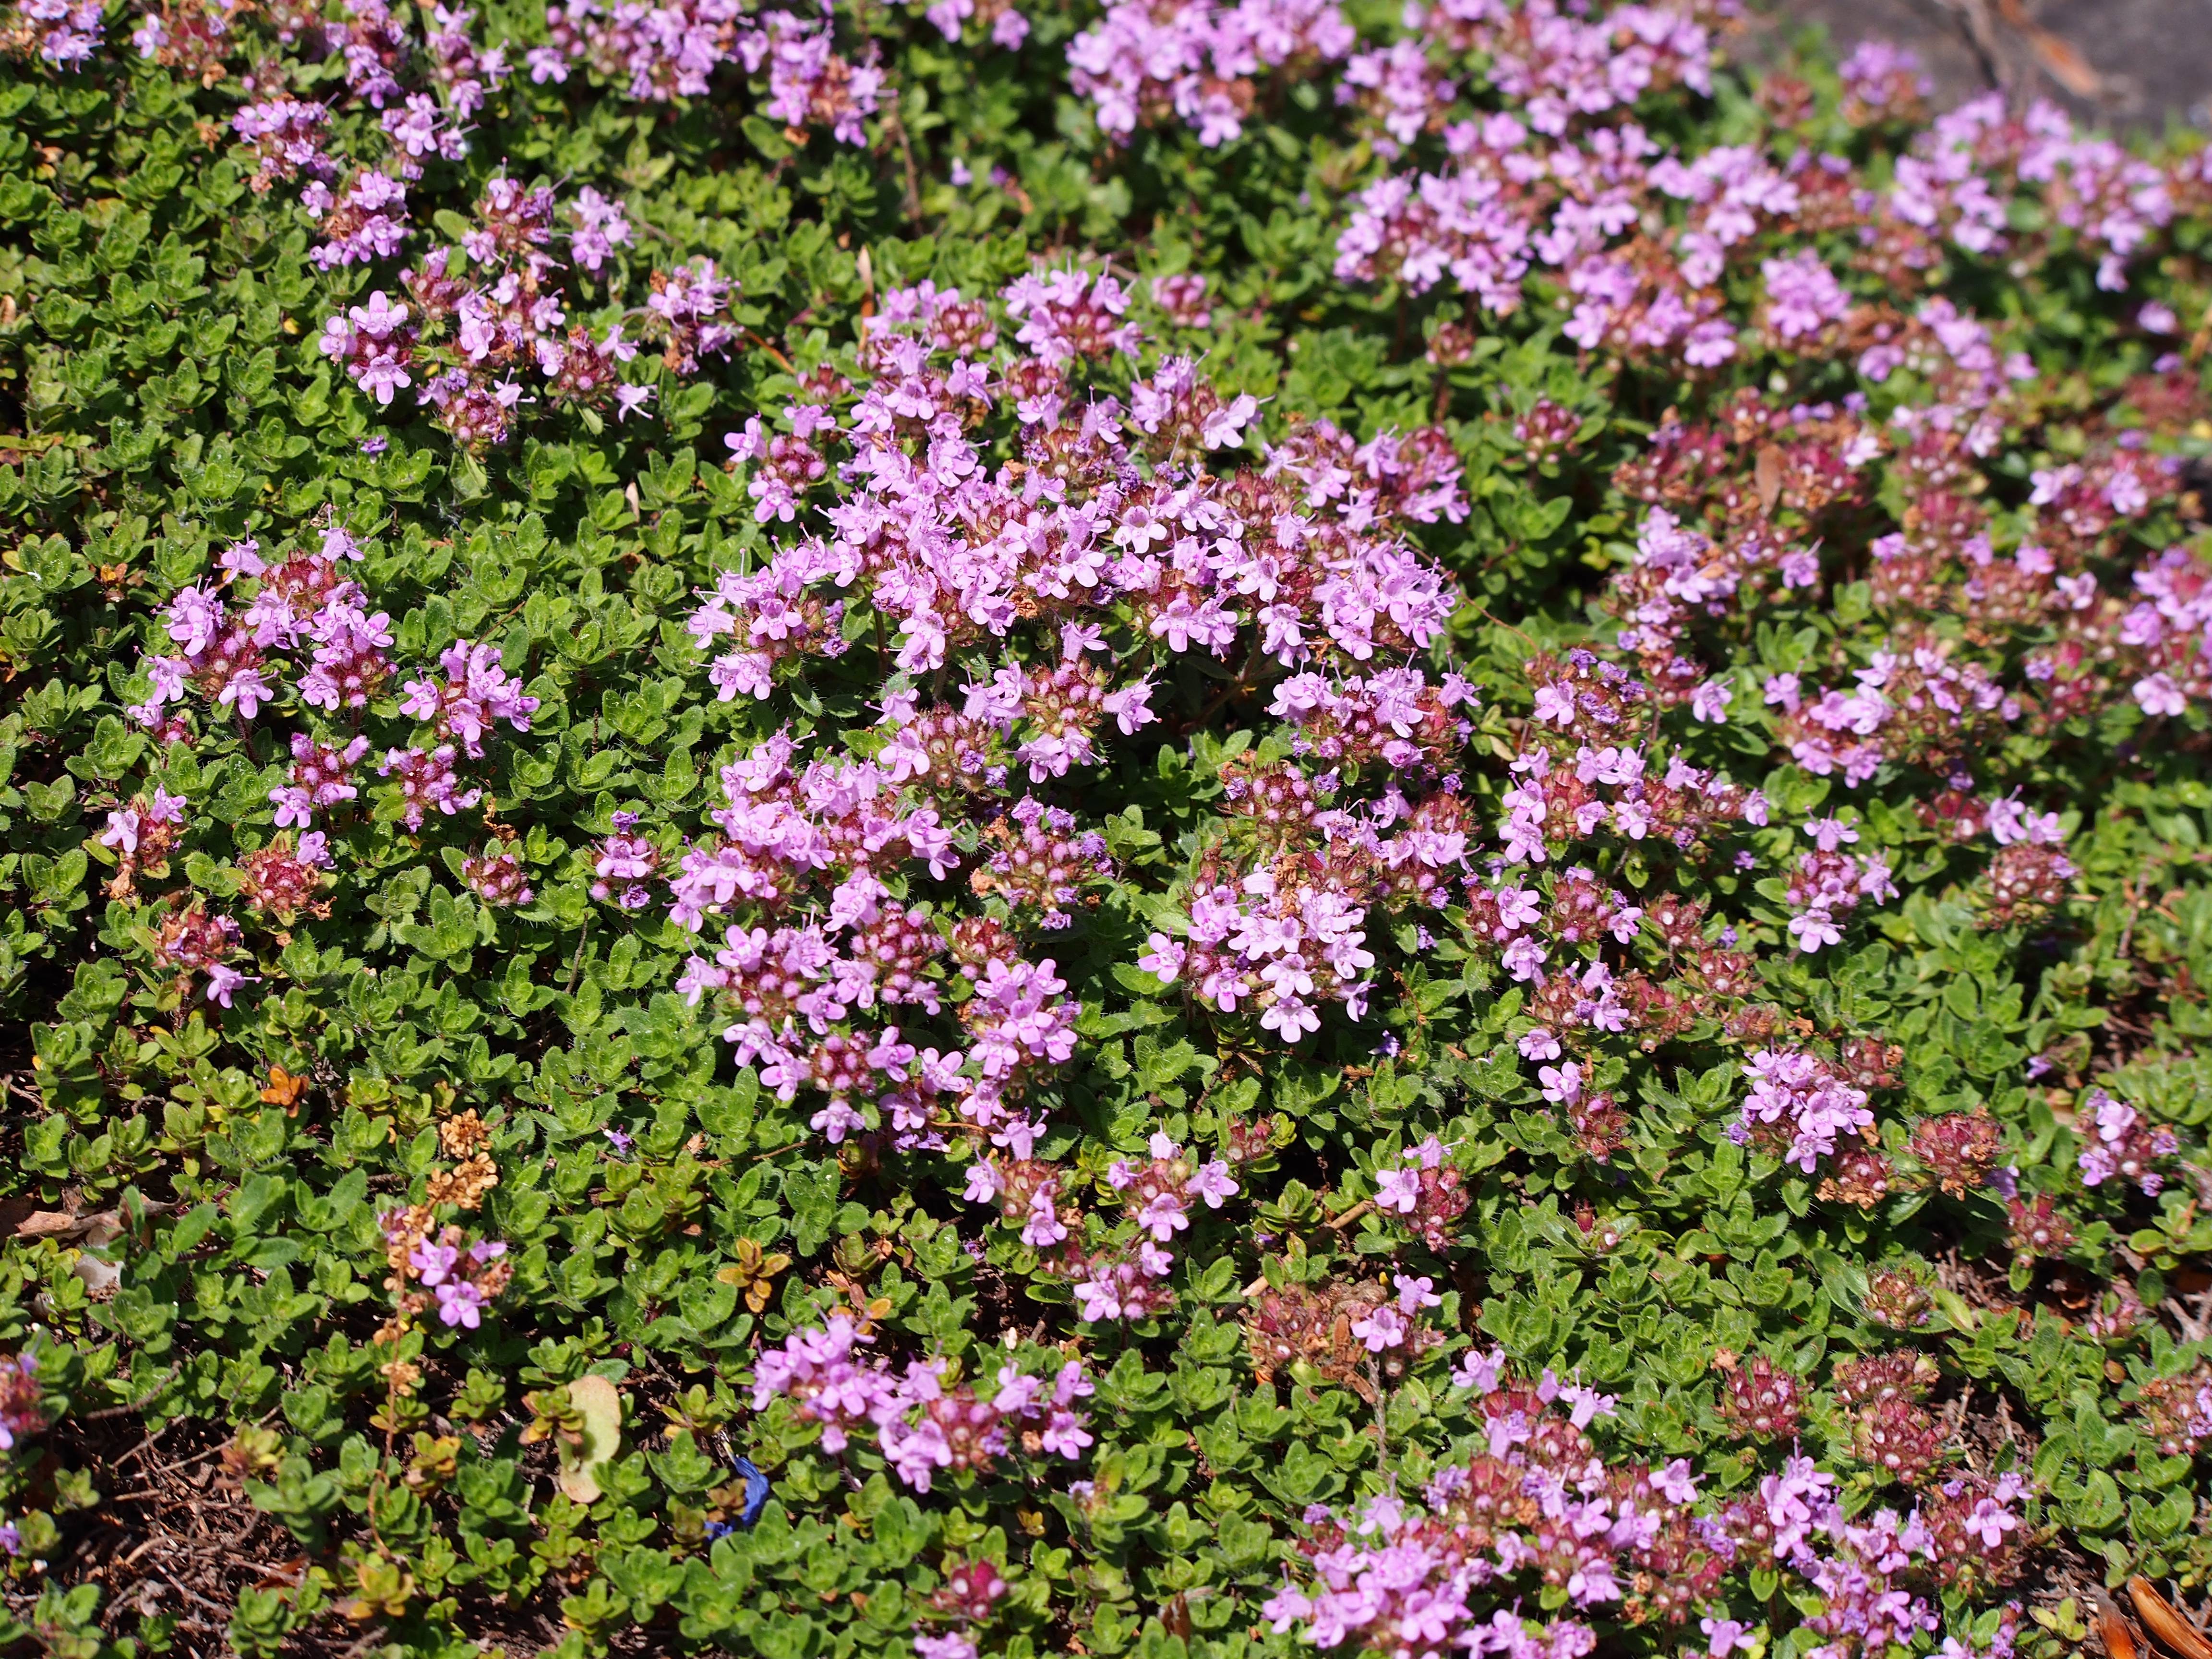 pink-brown flowers with lime-green leaves